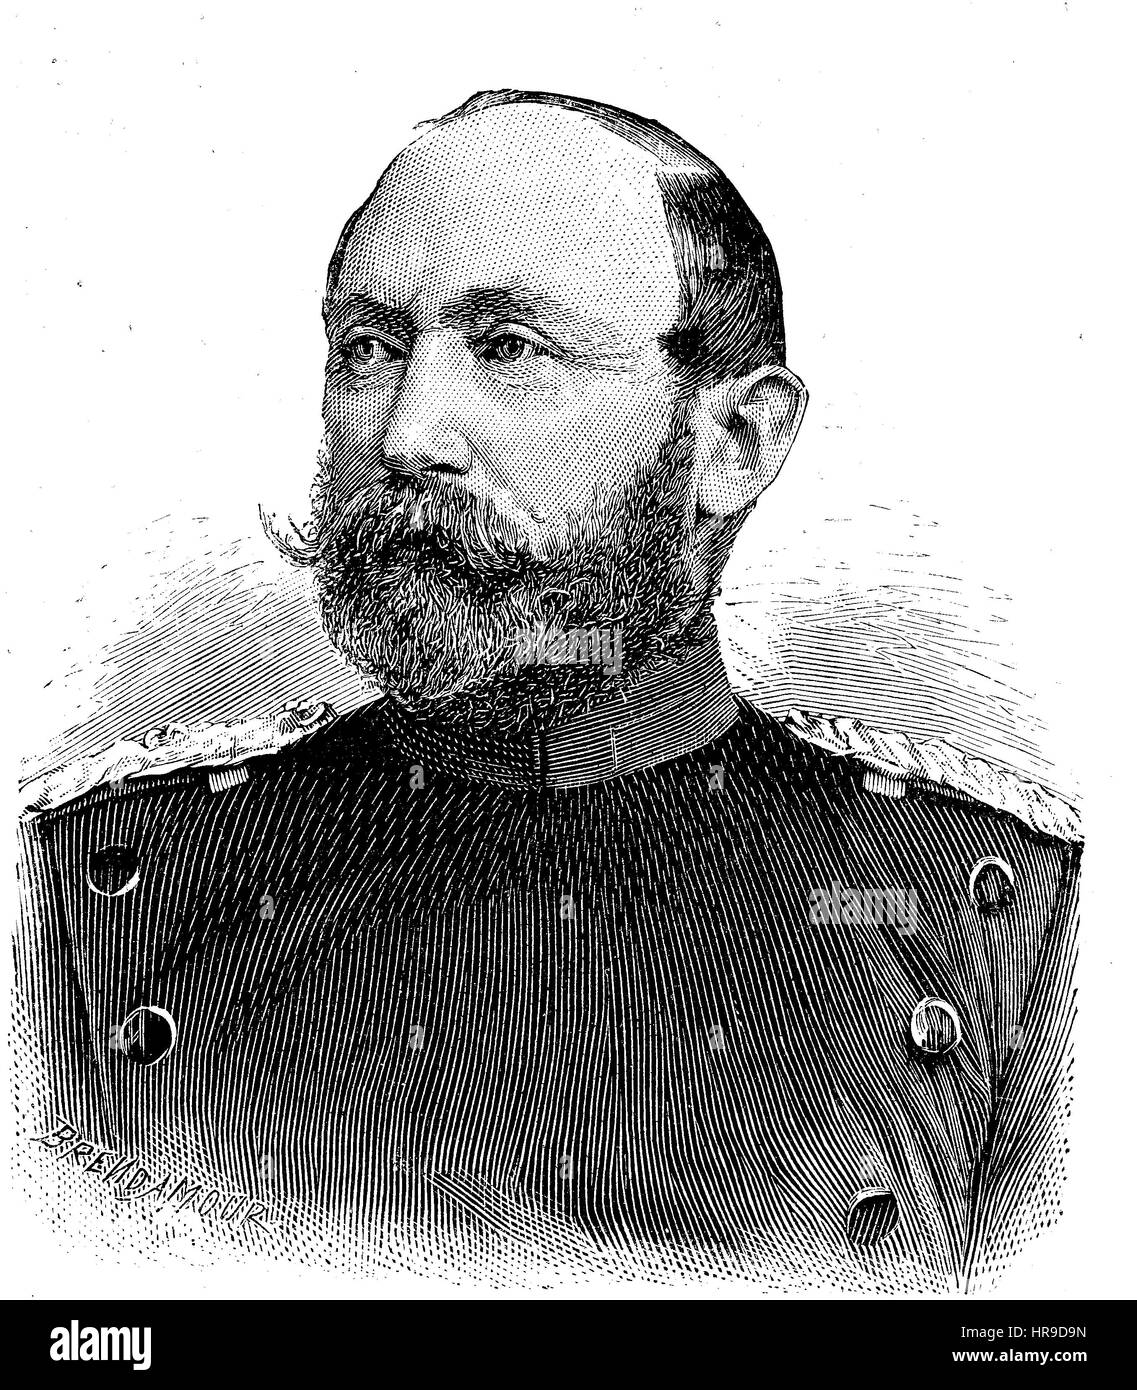 Gustav Adolf Oskar Wilhelm Freiherr von Meerscheidt-Huellessem, 1825 - 1895, Was a Prussian officer, lastly General of the infantry, Situation from the time of The Franco-Prussian War or Franco-German War,  Deutsch-Franzoesischer Krieg, 1870-1871, Reproduction of an original woodcut from the year 1885, digital improved Stock Photo